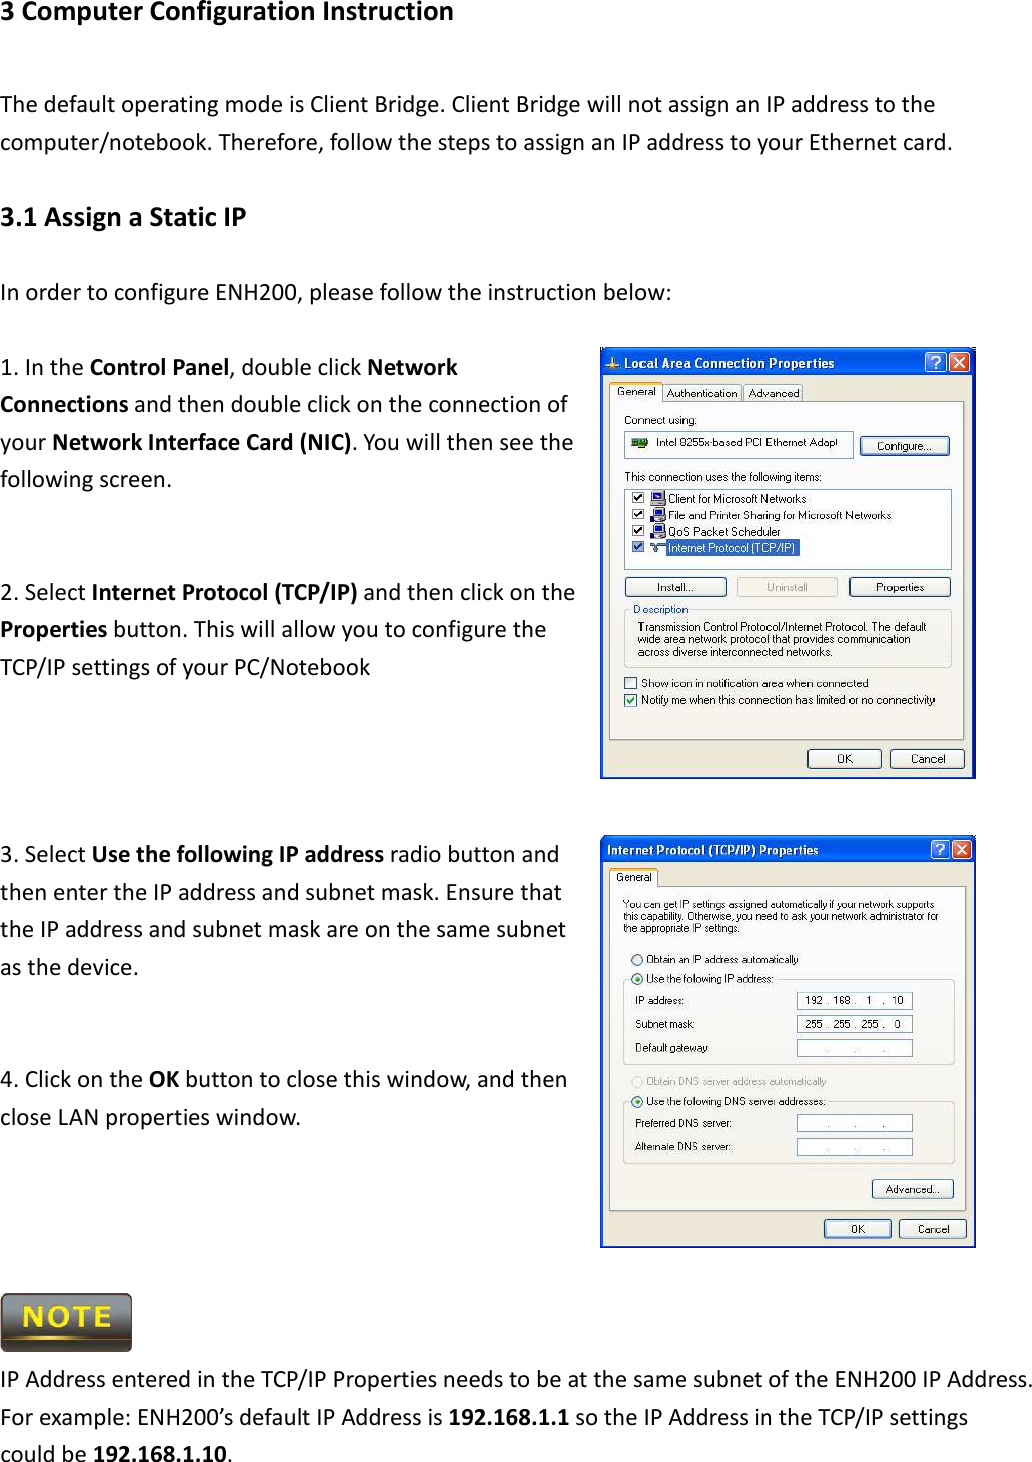 3 Computer Configuration Instruction The default operating mode is Client Bridge. Client Bridge will not assign an IP address to the computer/notebook. Therefore, follow the steps to assign an IP address to your Ethernet card. 3.1 Assign a Static IP In order to configure ENH200, please follow the instruction below:  1. In the Control Panel, double click Network Connections and then double click on the connection of your Network Interface Card (NIC). You will then see the following screen.   2. Select Internet Protocol (TCP/IP) and then click on the Properties button. This will allow you to configure the TCP/IP settings of your PC/Notebook     3. Select Use the following IP address radio button and then enter the IP address and subnet mask. Ensure that the IP address and subnet mask are on the same subnet as the device.   4. Click on the OK button to close this window, and then close LAN properties window.      IP Address entered in the TCP/IP Properties needs to be at the same subnet of the ENH200 IP Address. For example: ENH200’s default IP Address is 192.168.1.1 so the IP Address in the TCP/IP settings could be 192.168.1.10. 